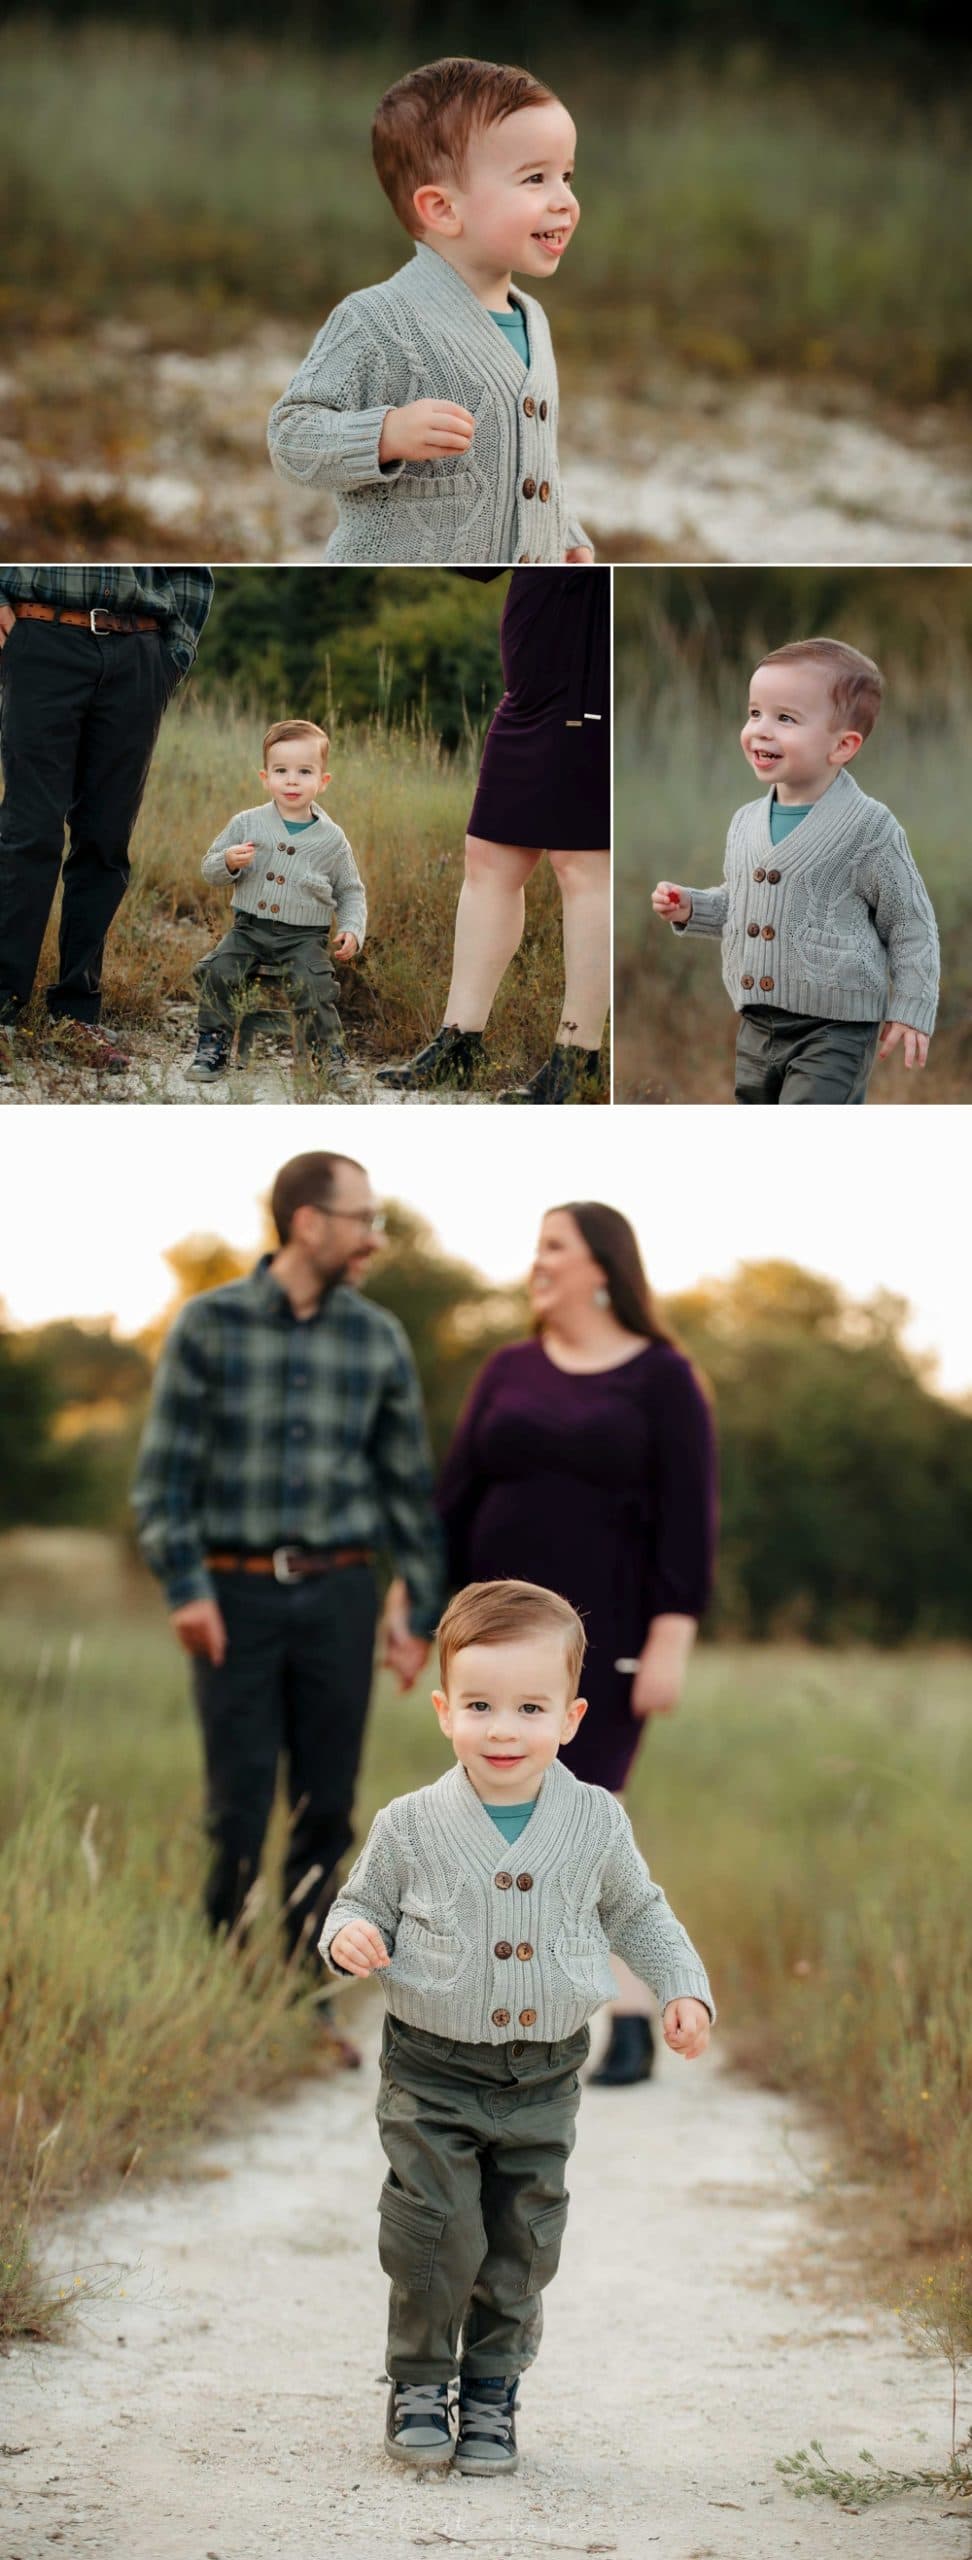 Fall family photos | What to wear fall family pictures